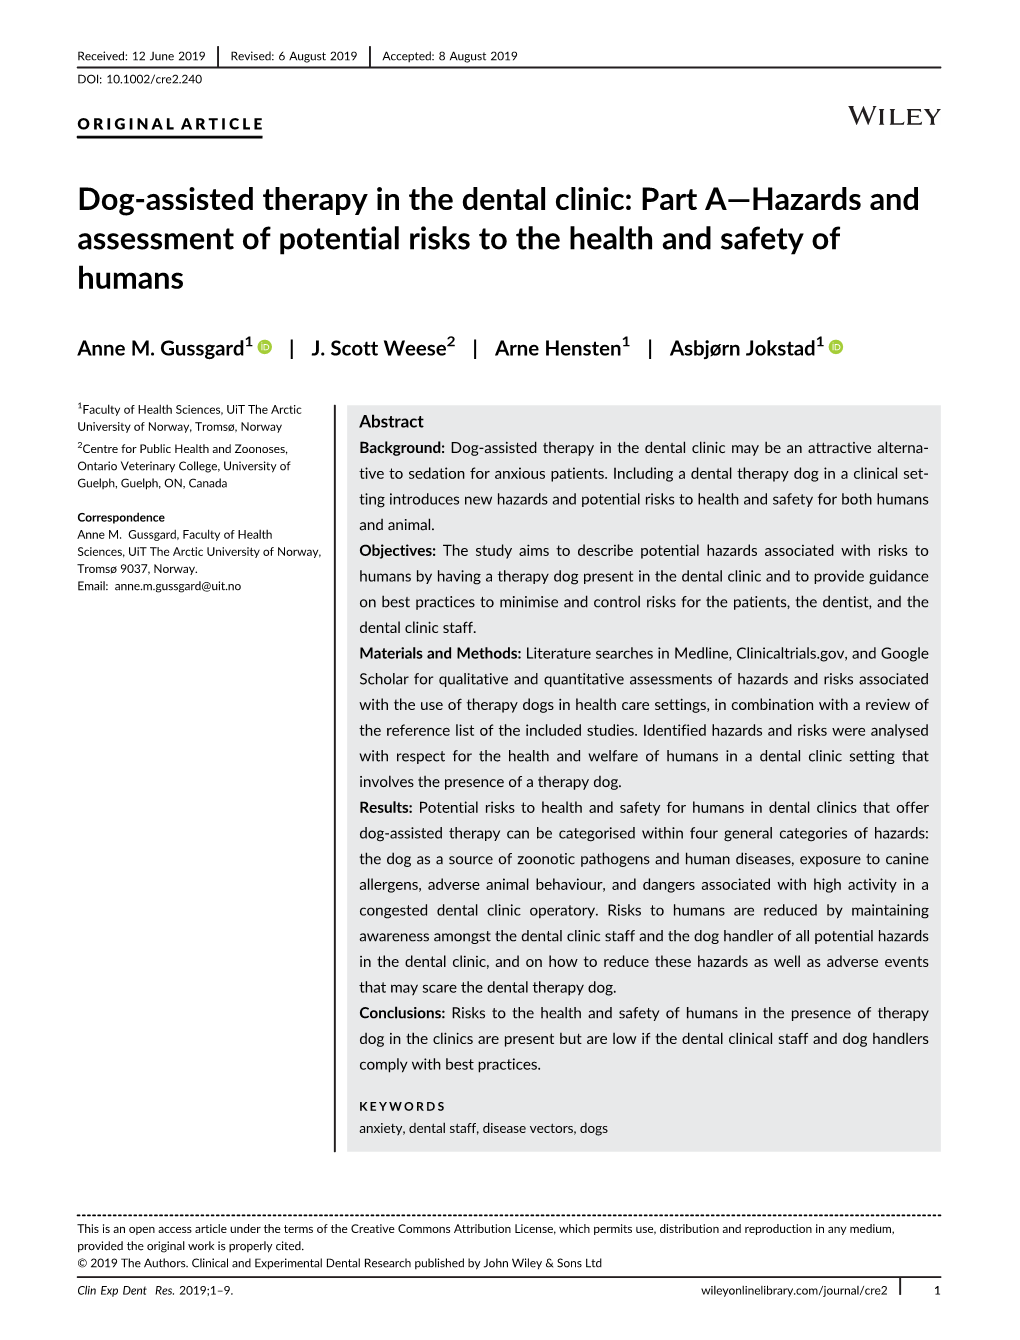 Dog-Assisted Therapy in the Dental Clinic: Part A—Hazards and Assessment of Potential Risks to the Health and Safety of Humans